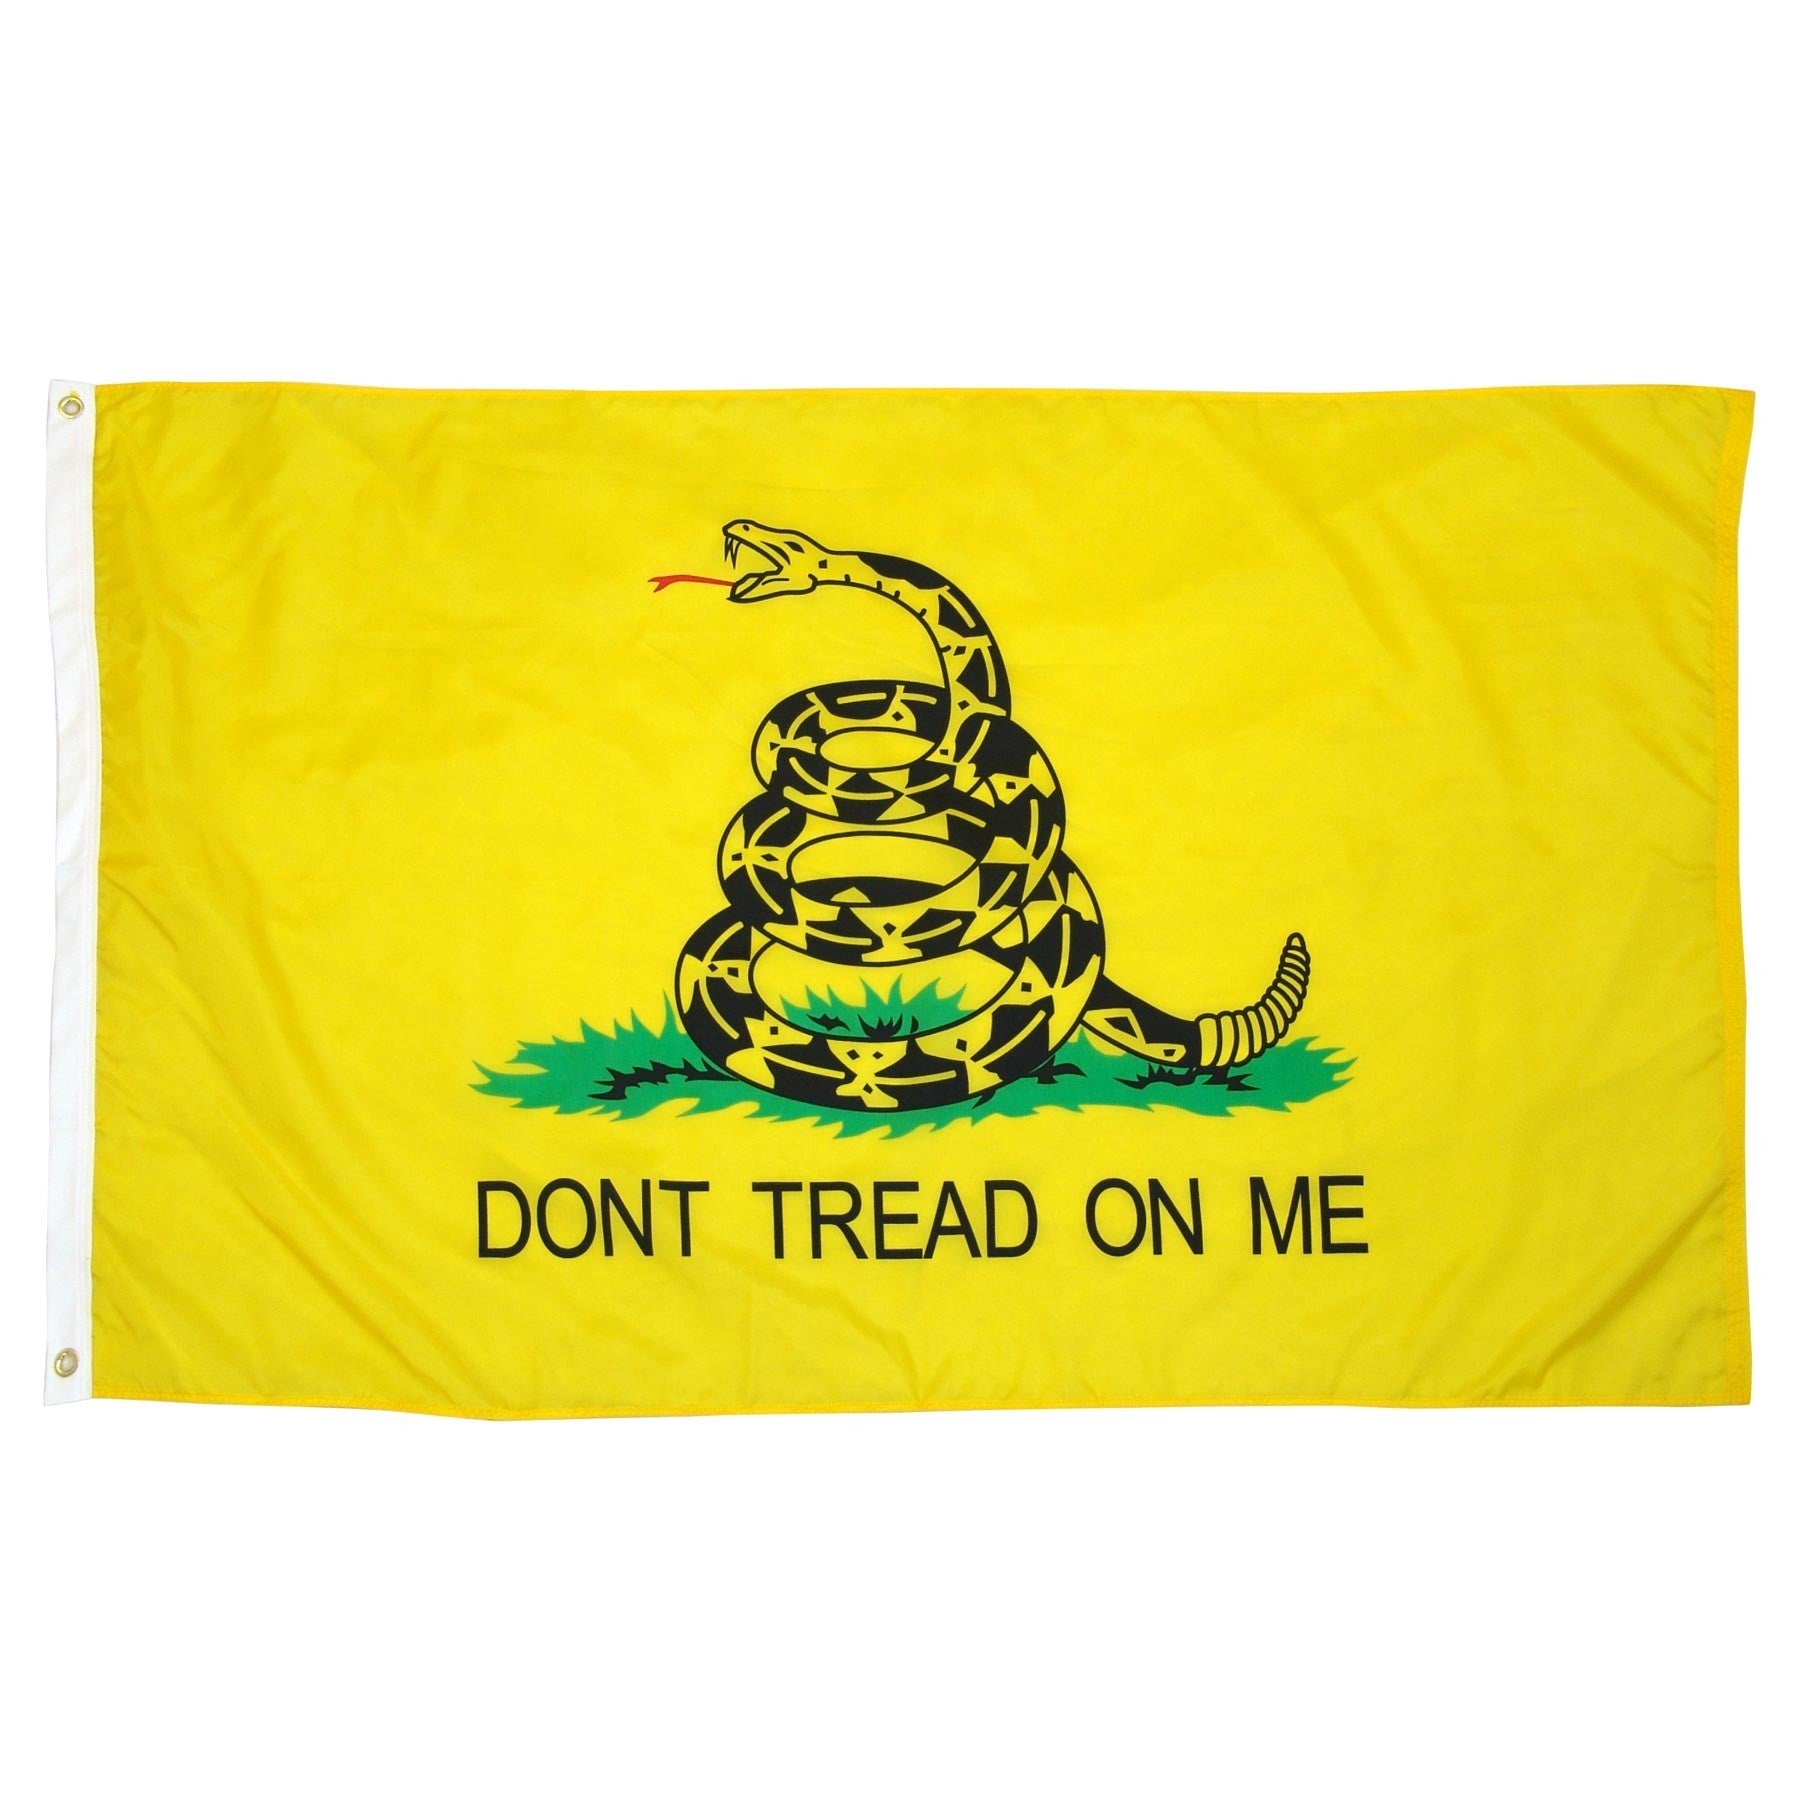 Gadsden "Don't Treat on Me" 3ft x 5ft High Quality Outdoor Nylon Flags